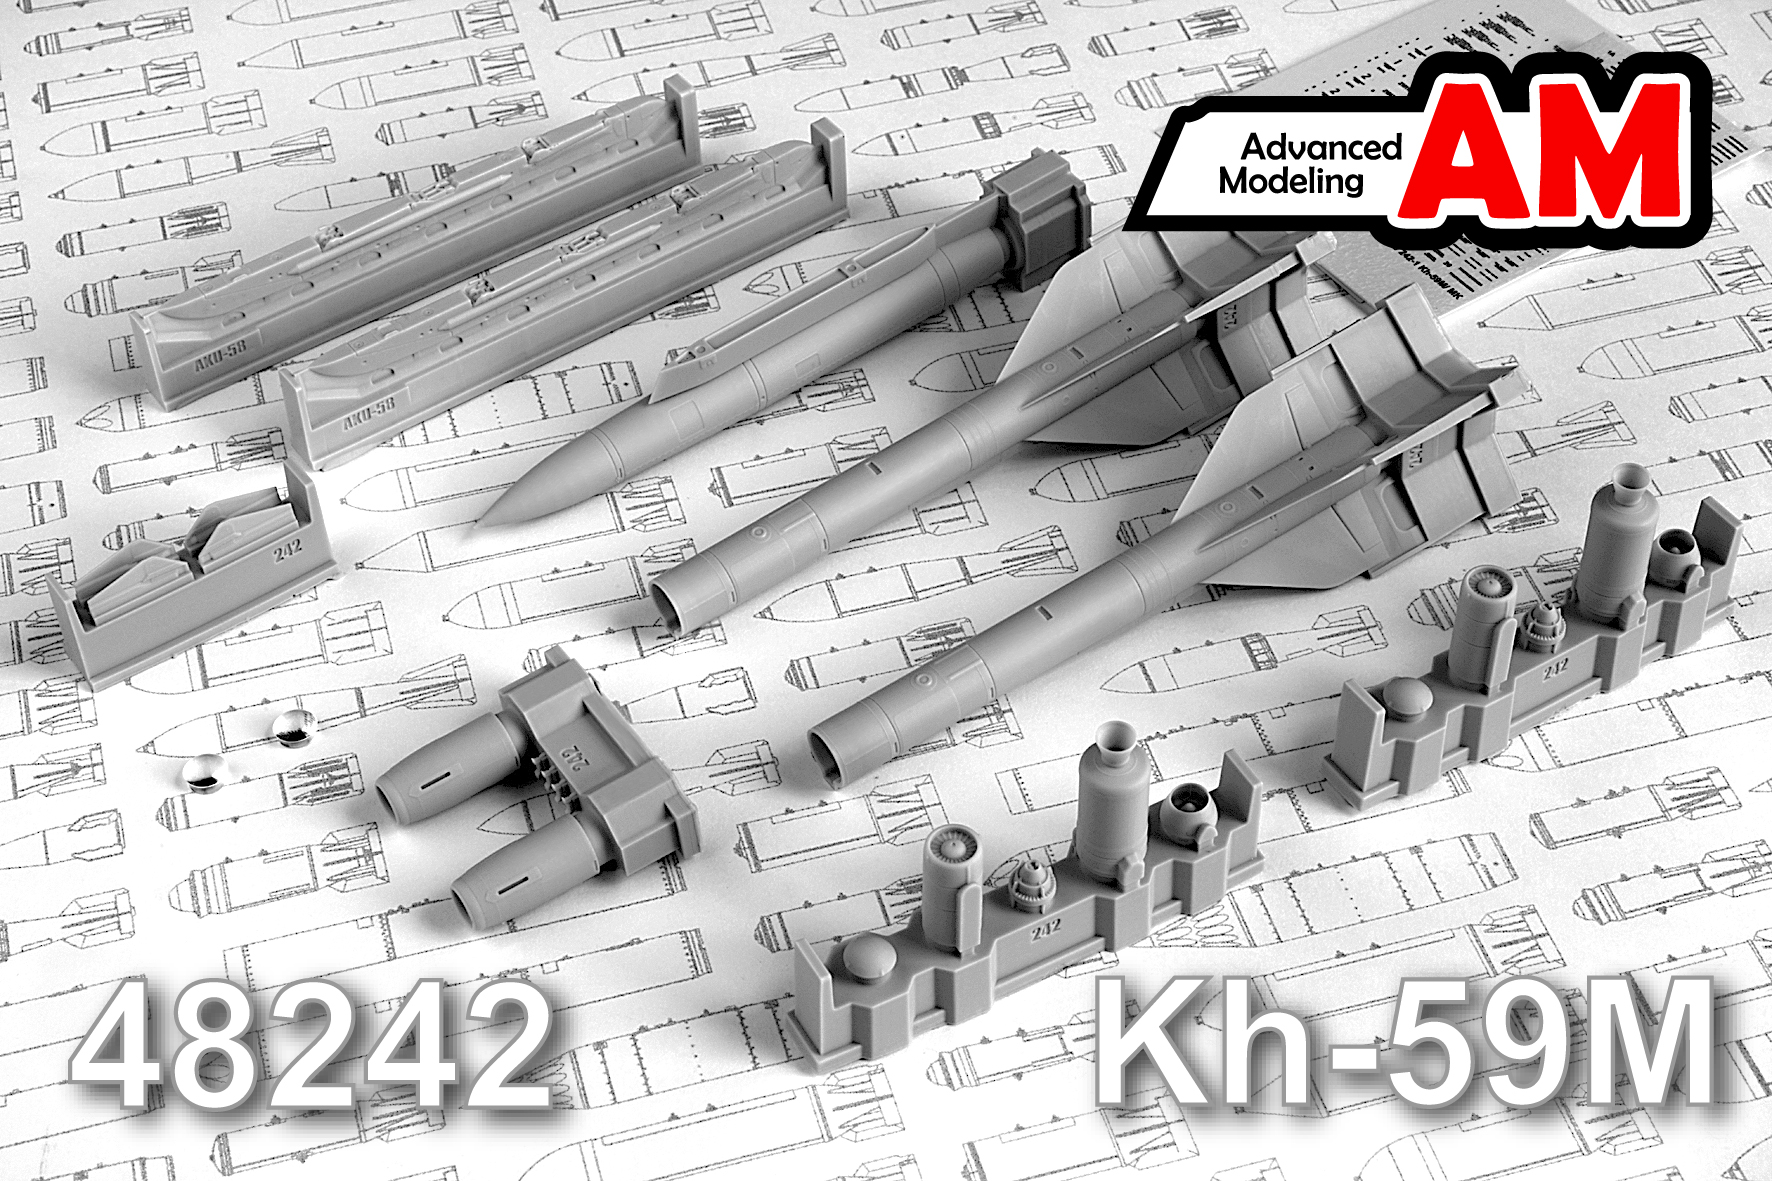 Additions (3D resin printing) 1/48 Aircraft guided missile Kh-59M with launcher AKU-58 (Advanced Modeling) 